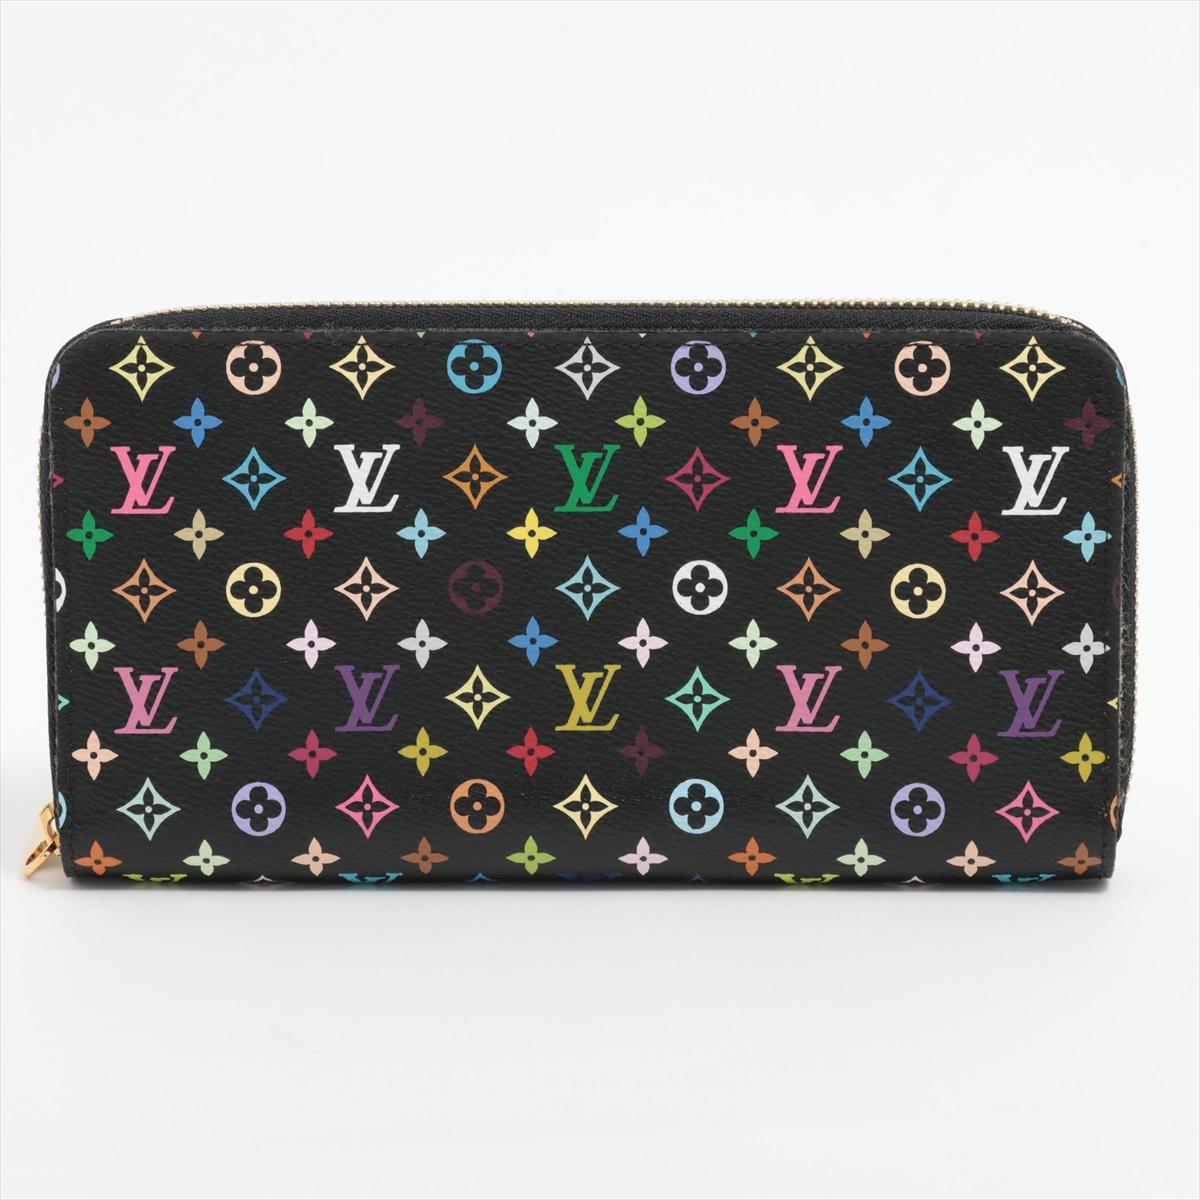 The Louis Vuitton Black Multicolor Zippy Wallet is a vibrant and stylish accessory that combines practicality with a playful design. The wallet features Louis Vuitton's iconic monogram canvas in a black multicolor version, which adds a pop of color